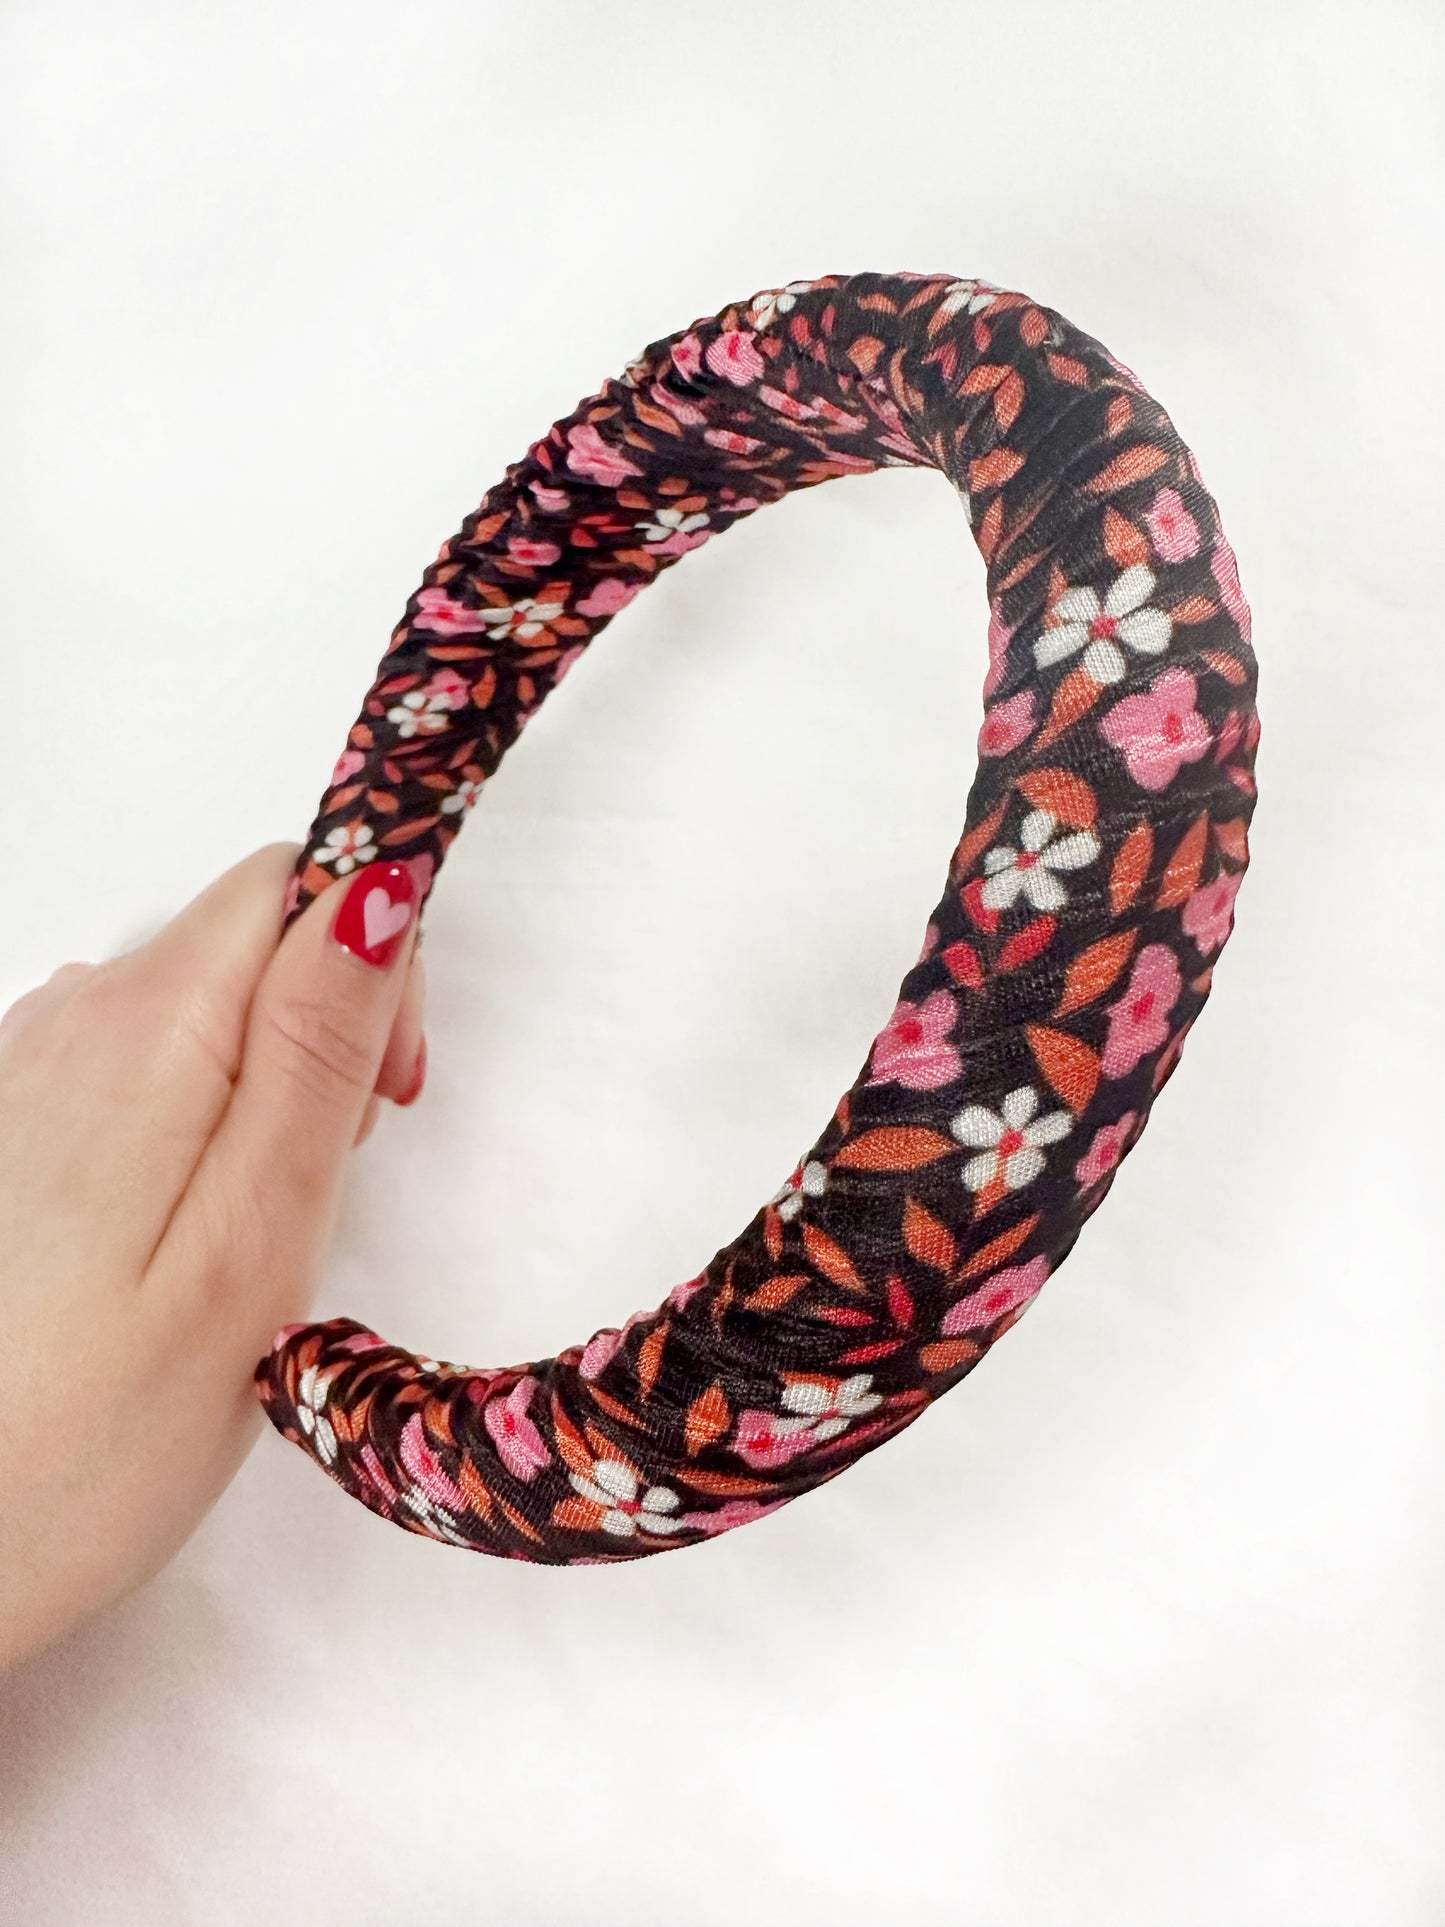 Classic Headband in floral plisse